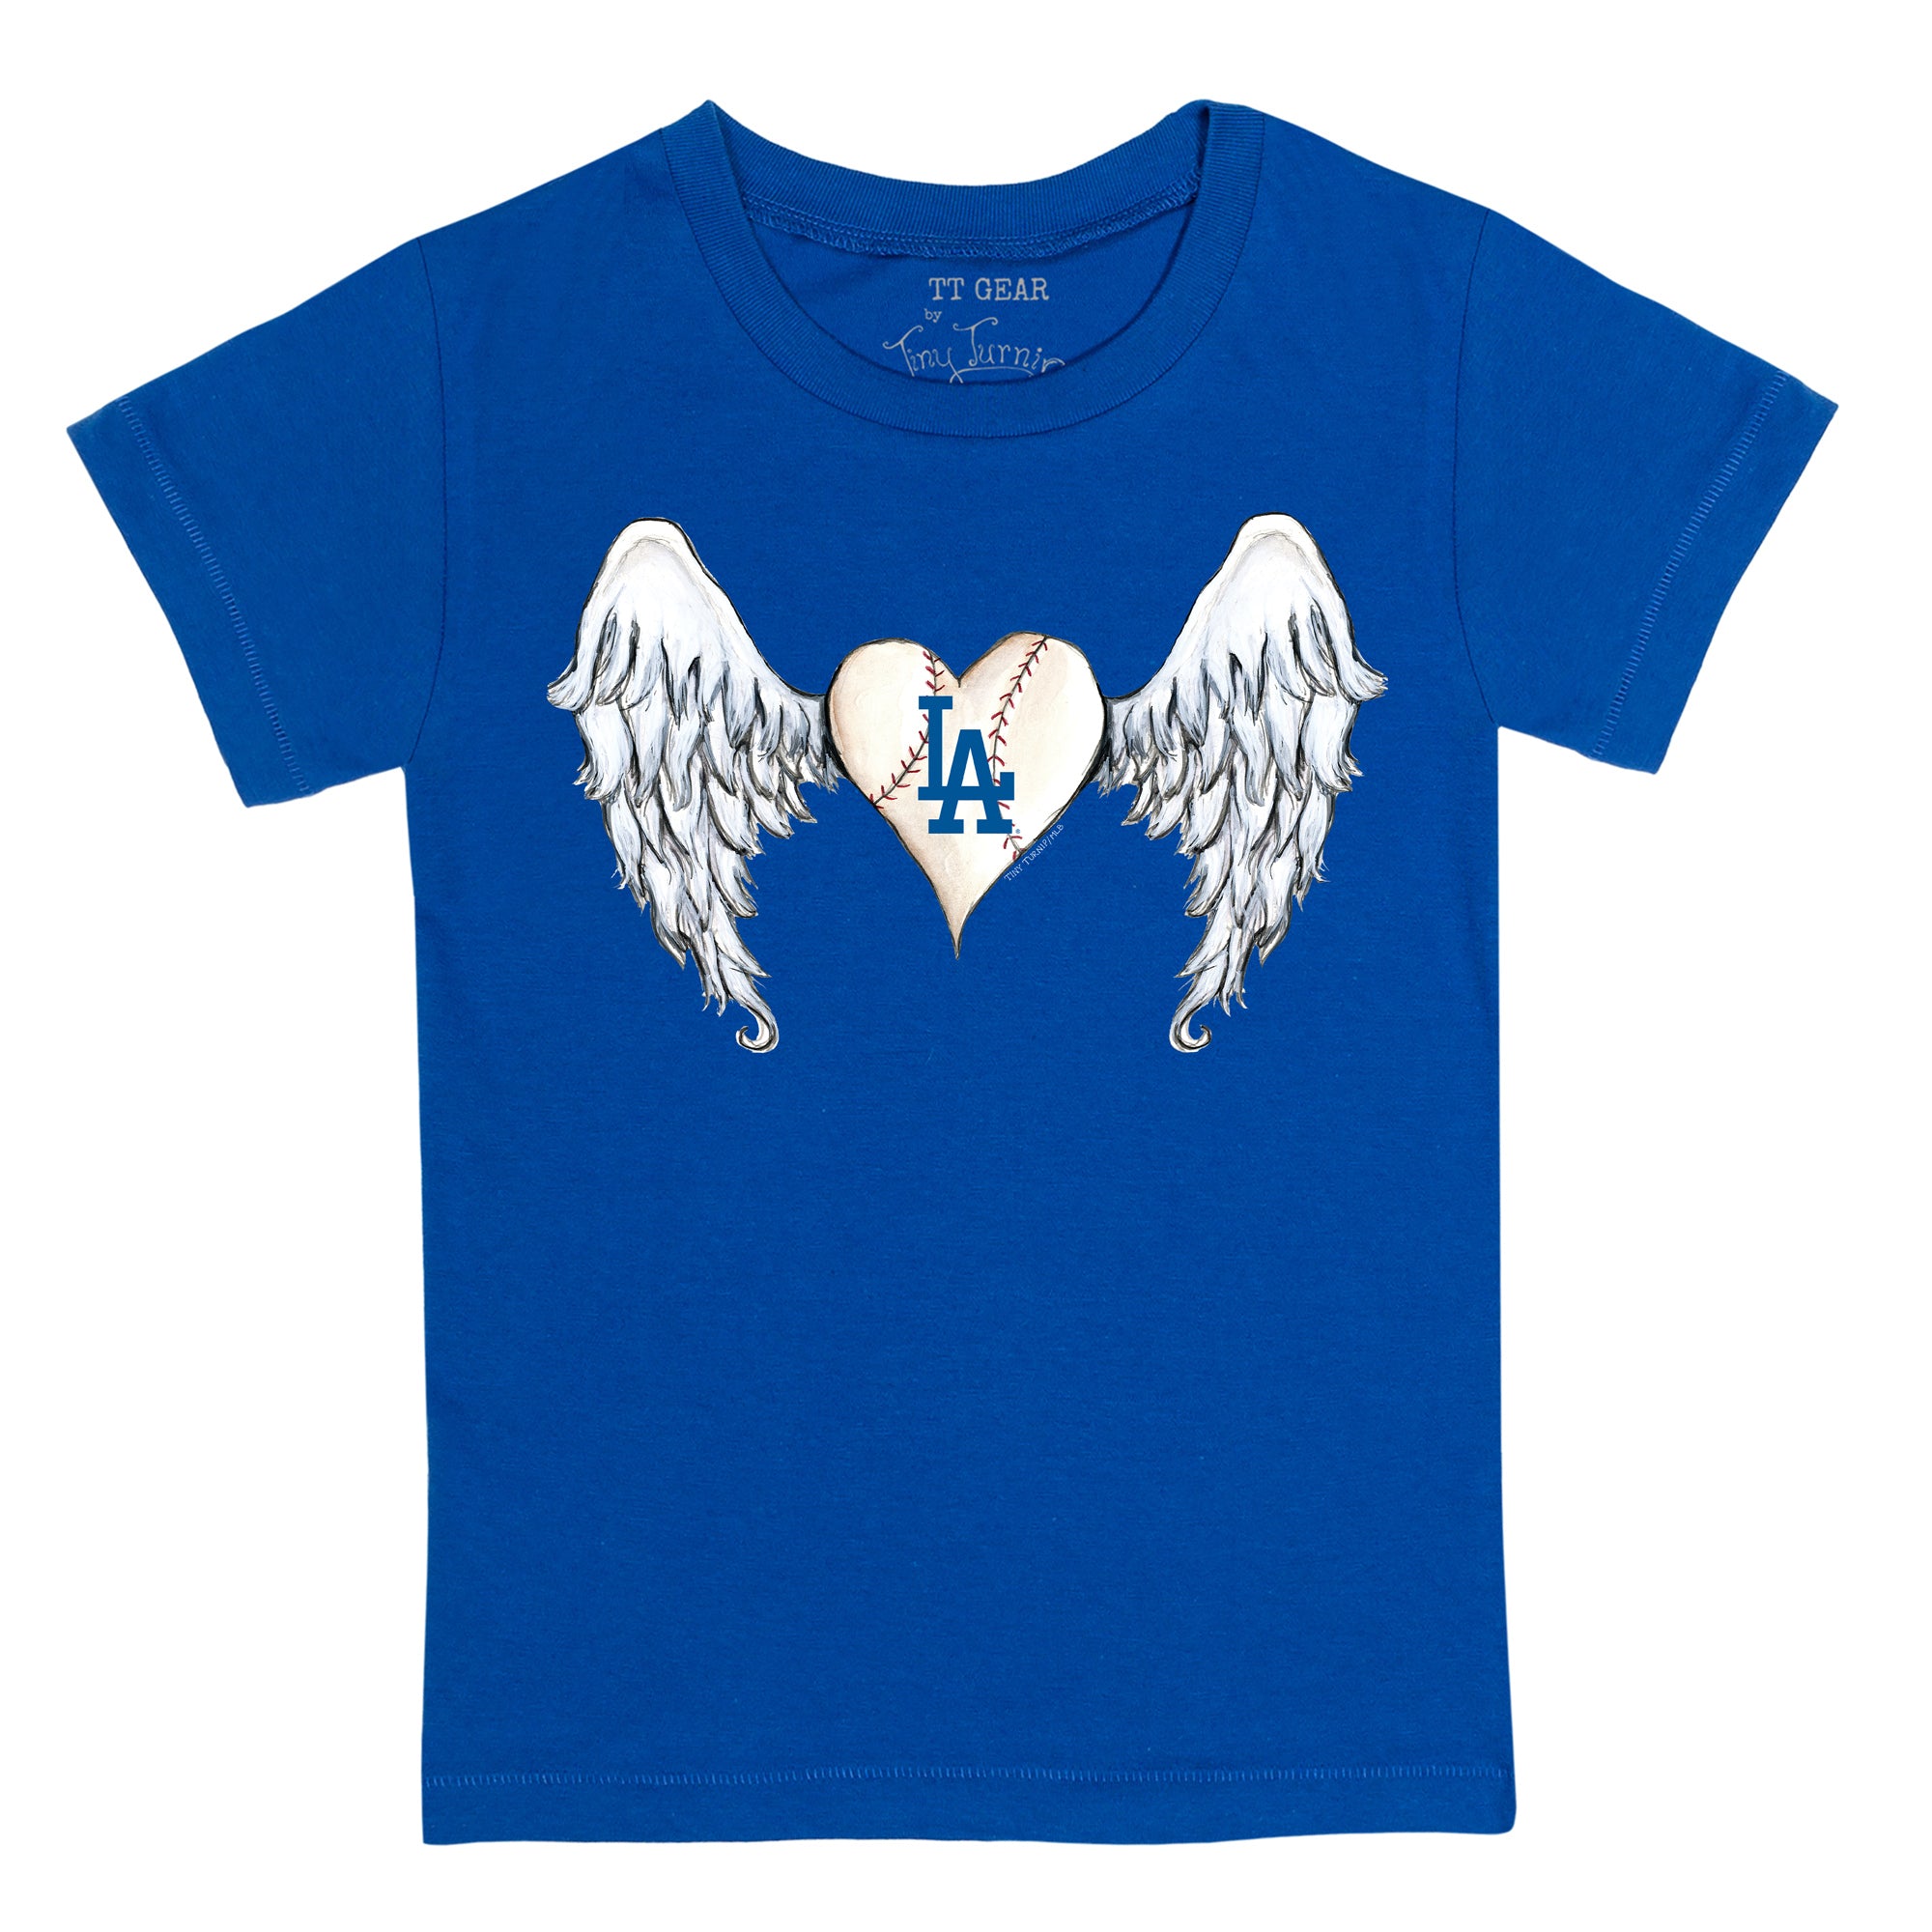 Women's Tiny Turnip White Los Angeles Dodgers Angel Wings T-Shirt Size: Extra Small